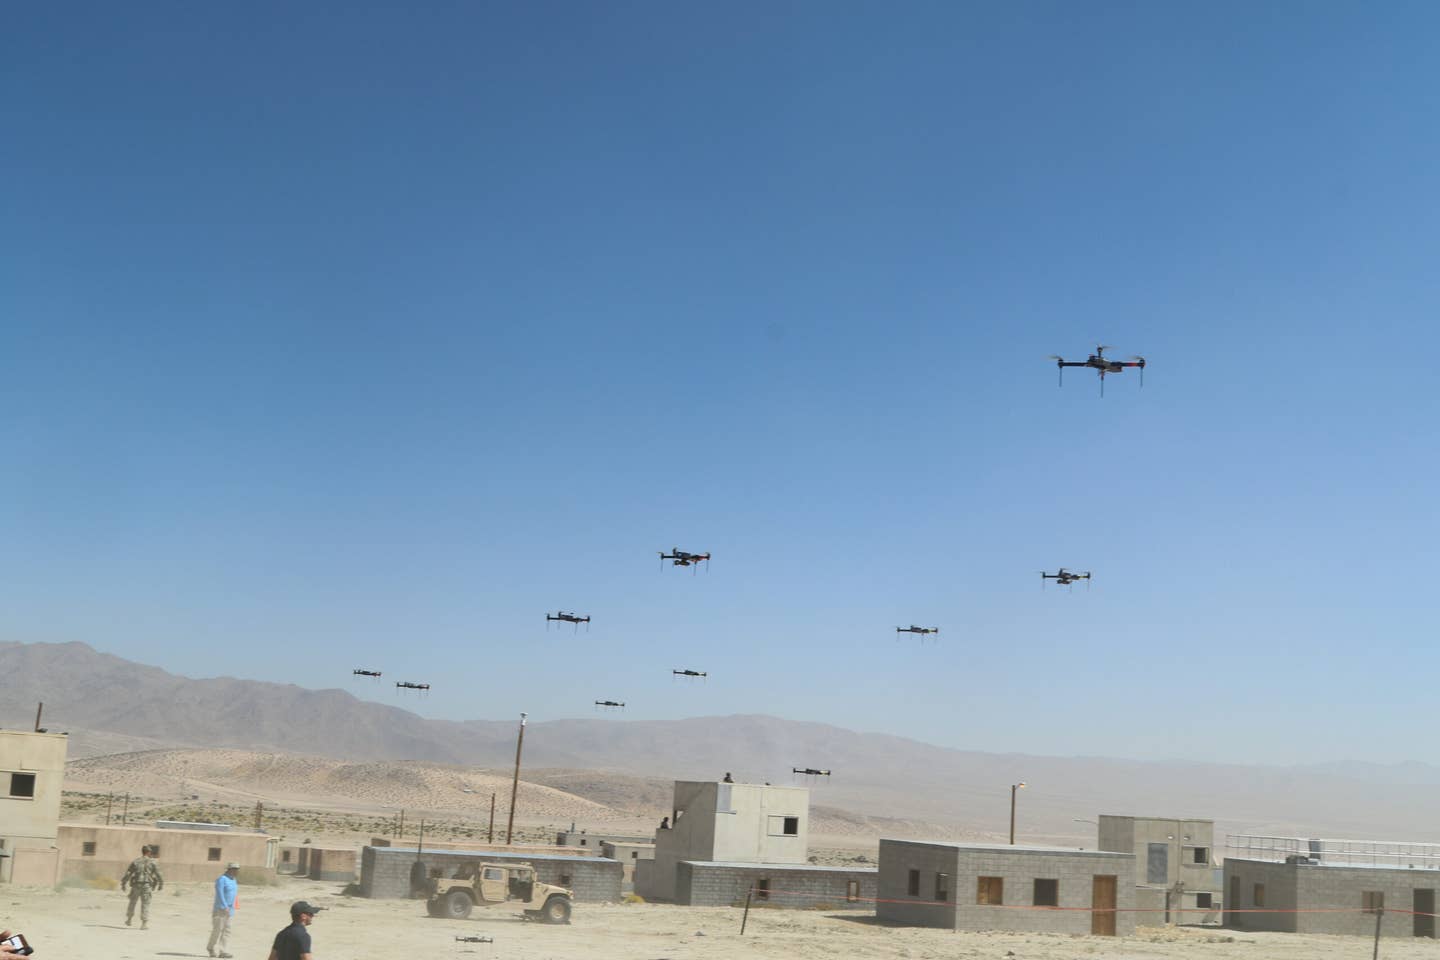 The Army has tested larger swarms of smaller drones, like this flock of 40 quadcopters at the National Training Center in California, but EDGE 22 will see the largest swarm of air-launched effects to date. U.S. Army Photo by Pv2 James Newsome